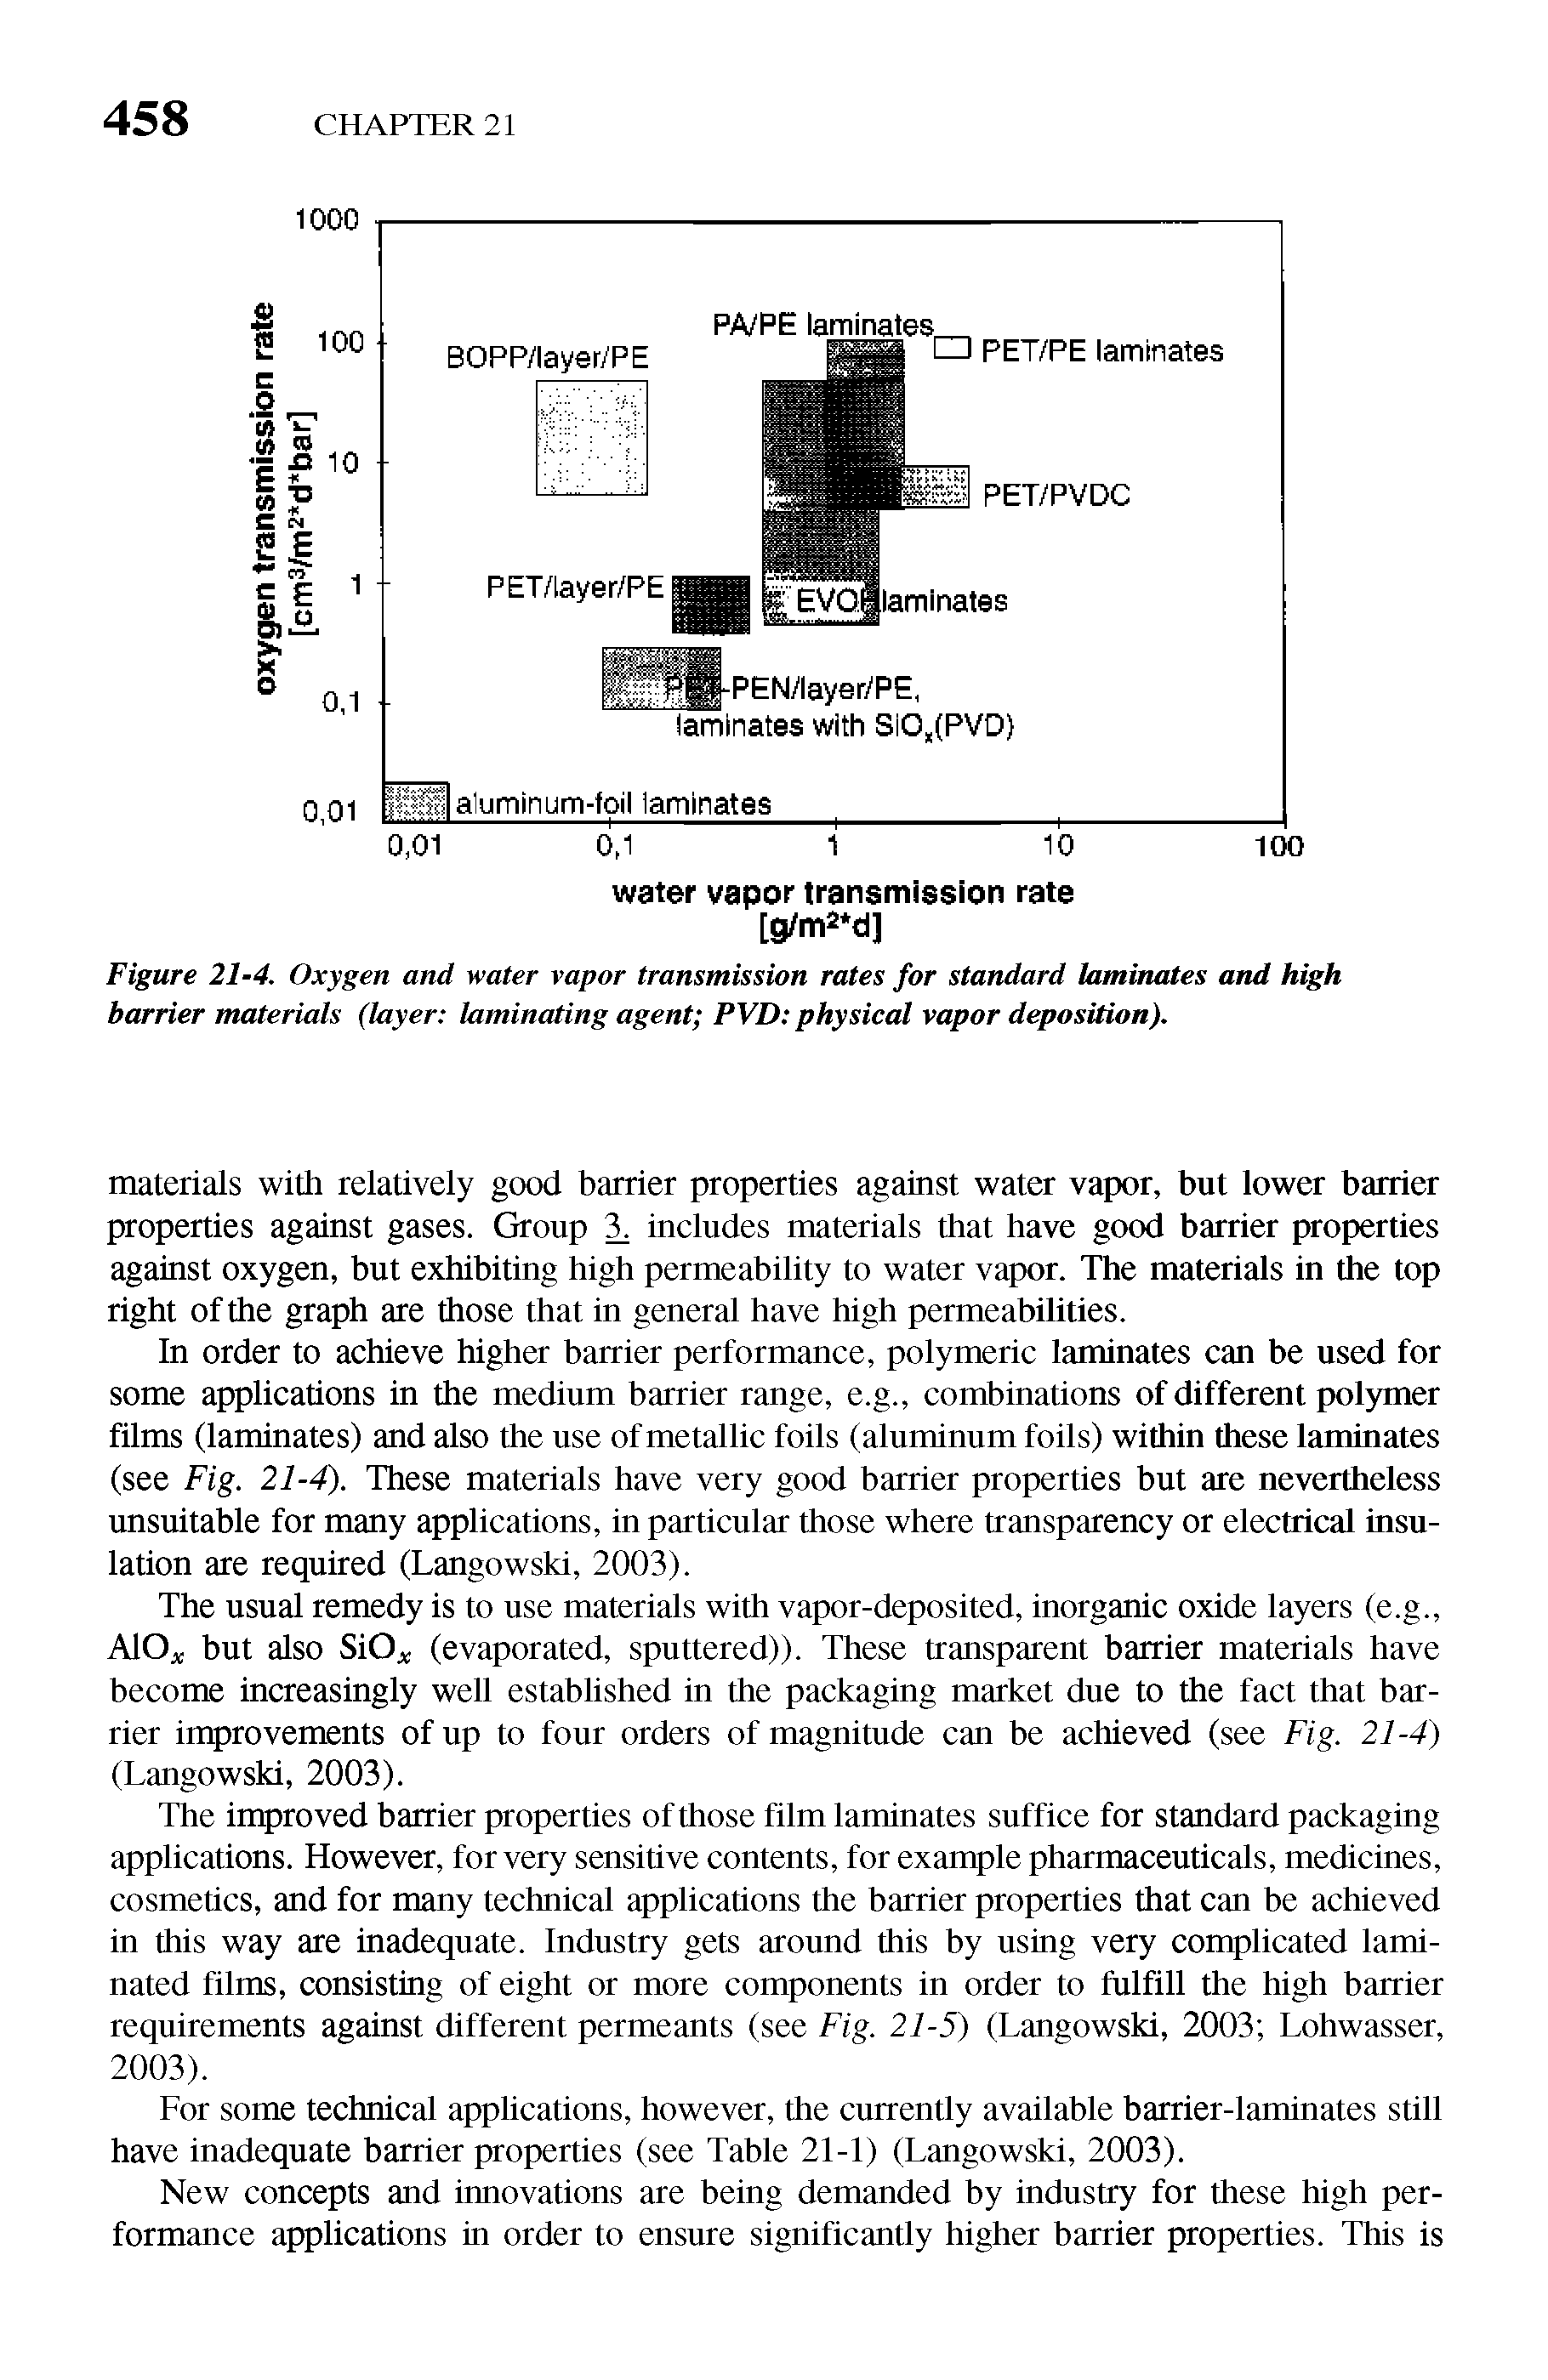 Figure 21-4. Oxygen and water vapor transmission rates for standard laminates and high barrier materials (layer laminating agent PVD physical vapor deposition).